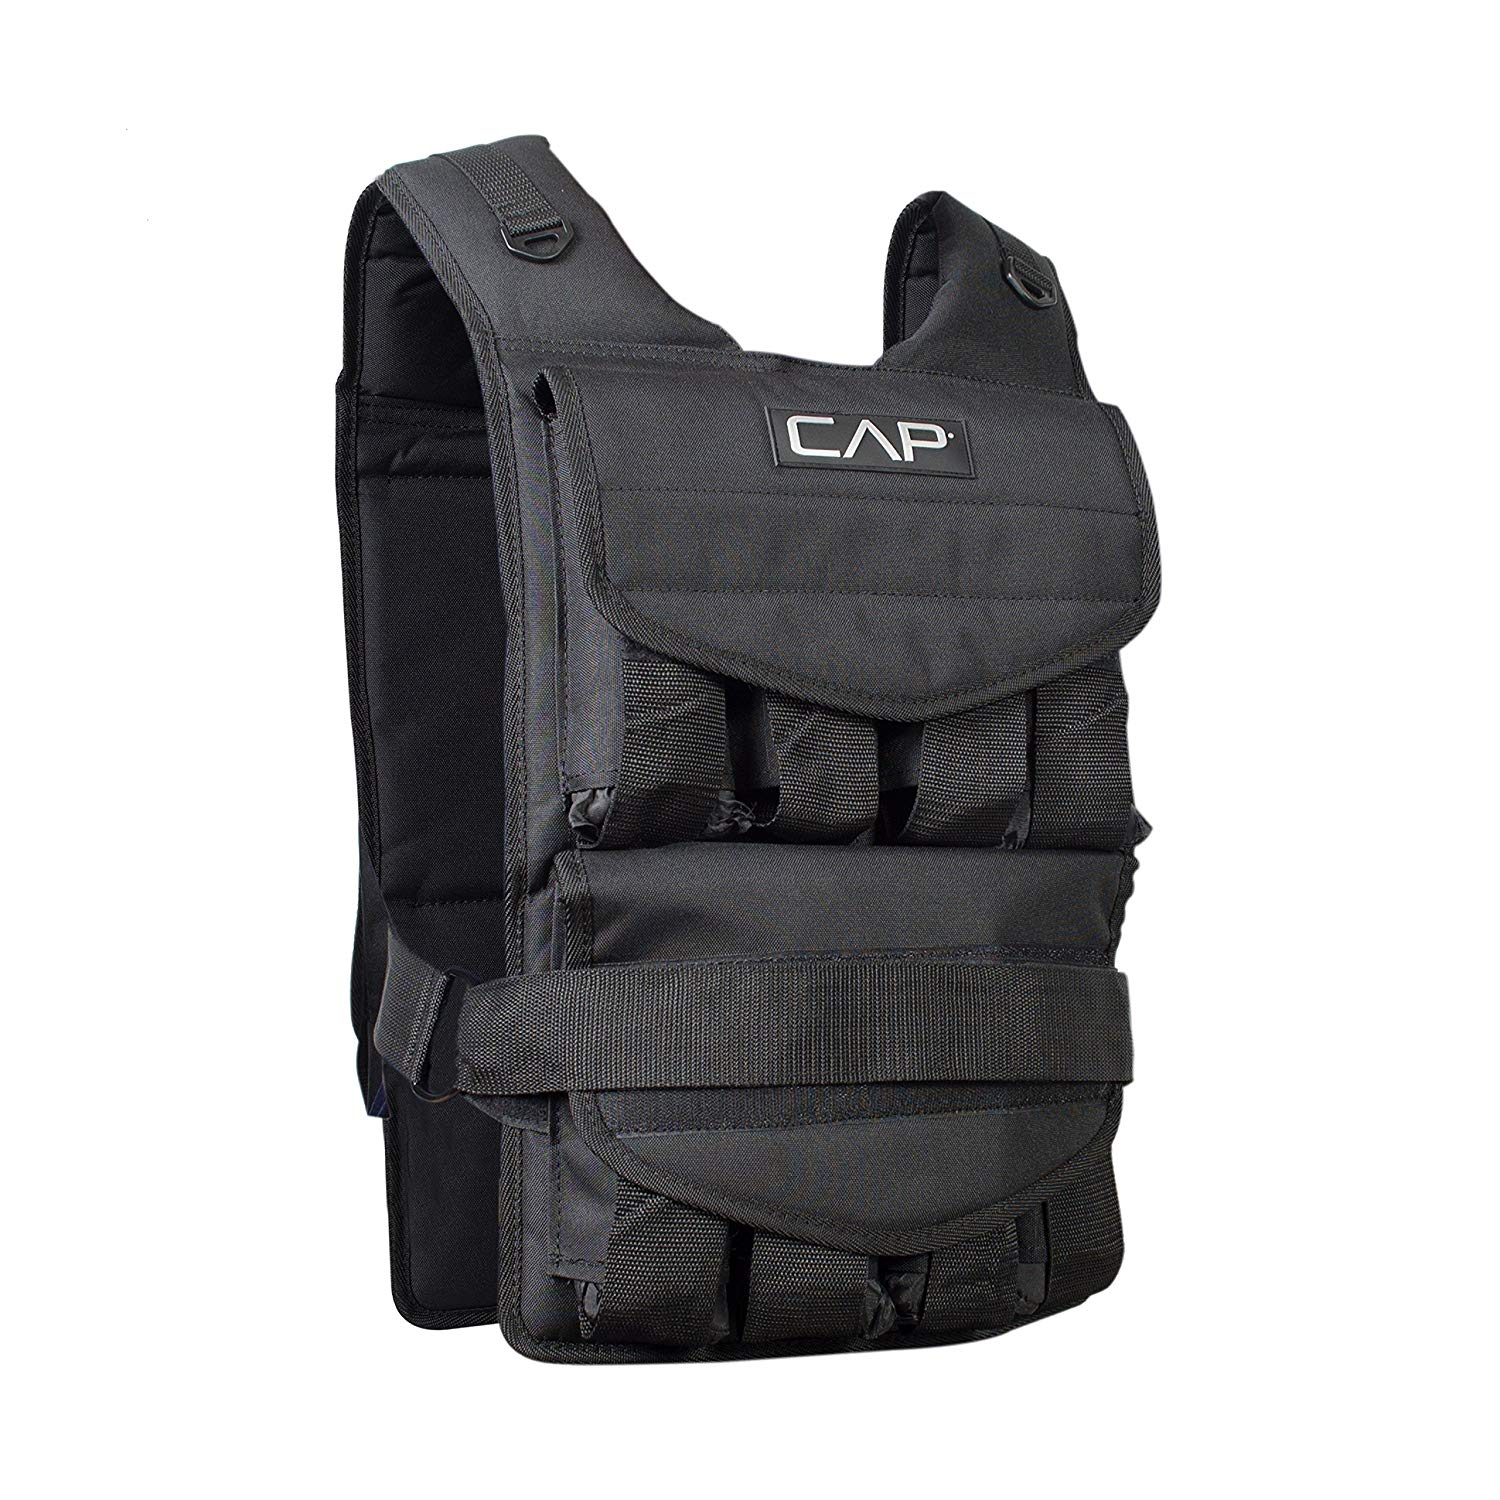 cap barbell adjustable weighted vest, 40 lb - image 1 of 5